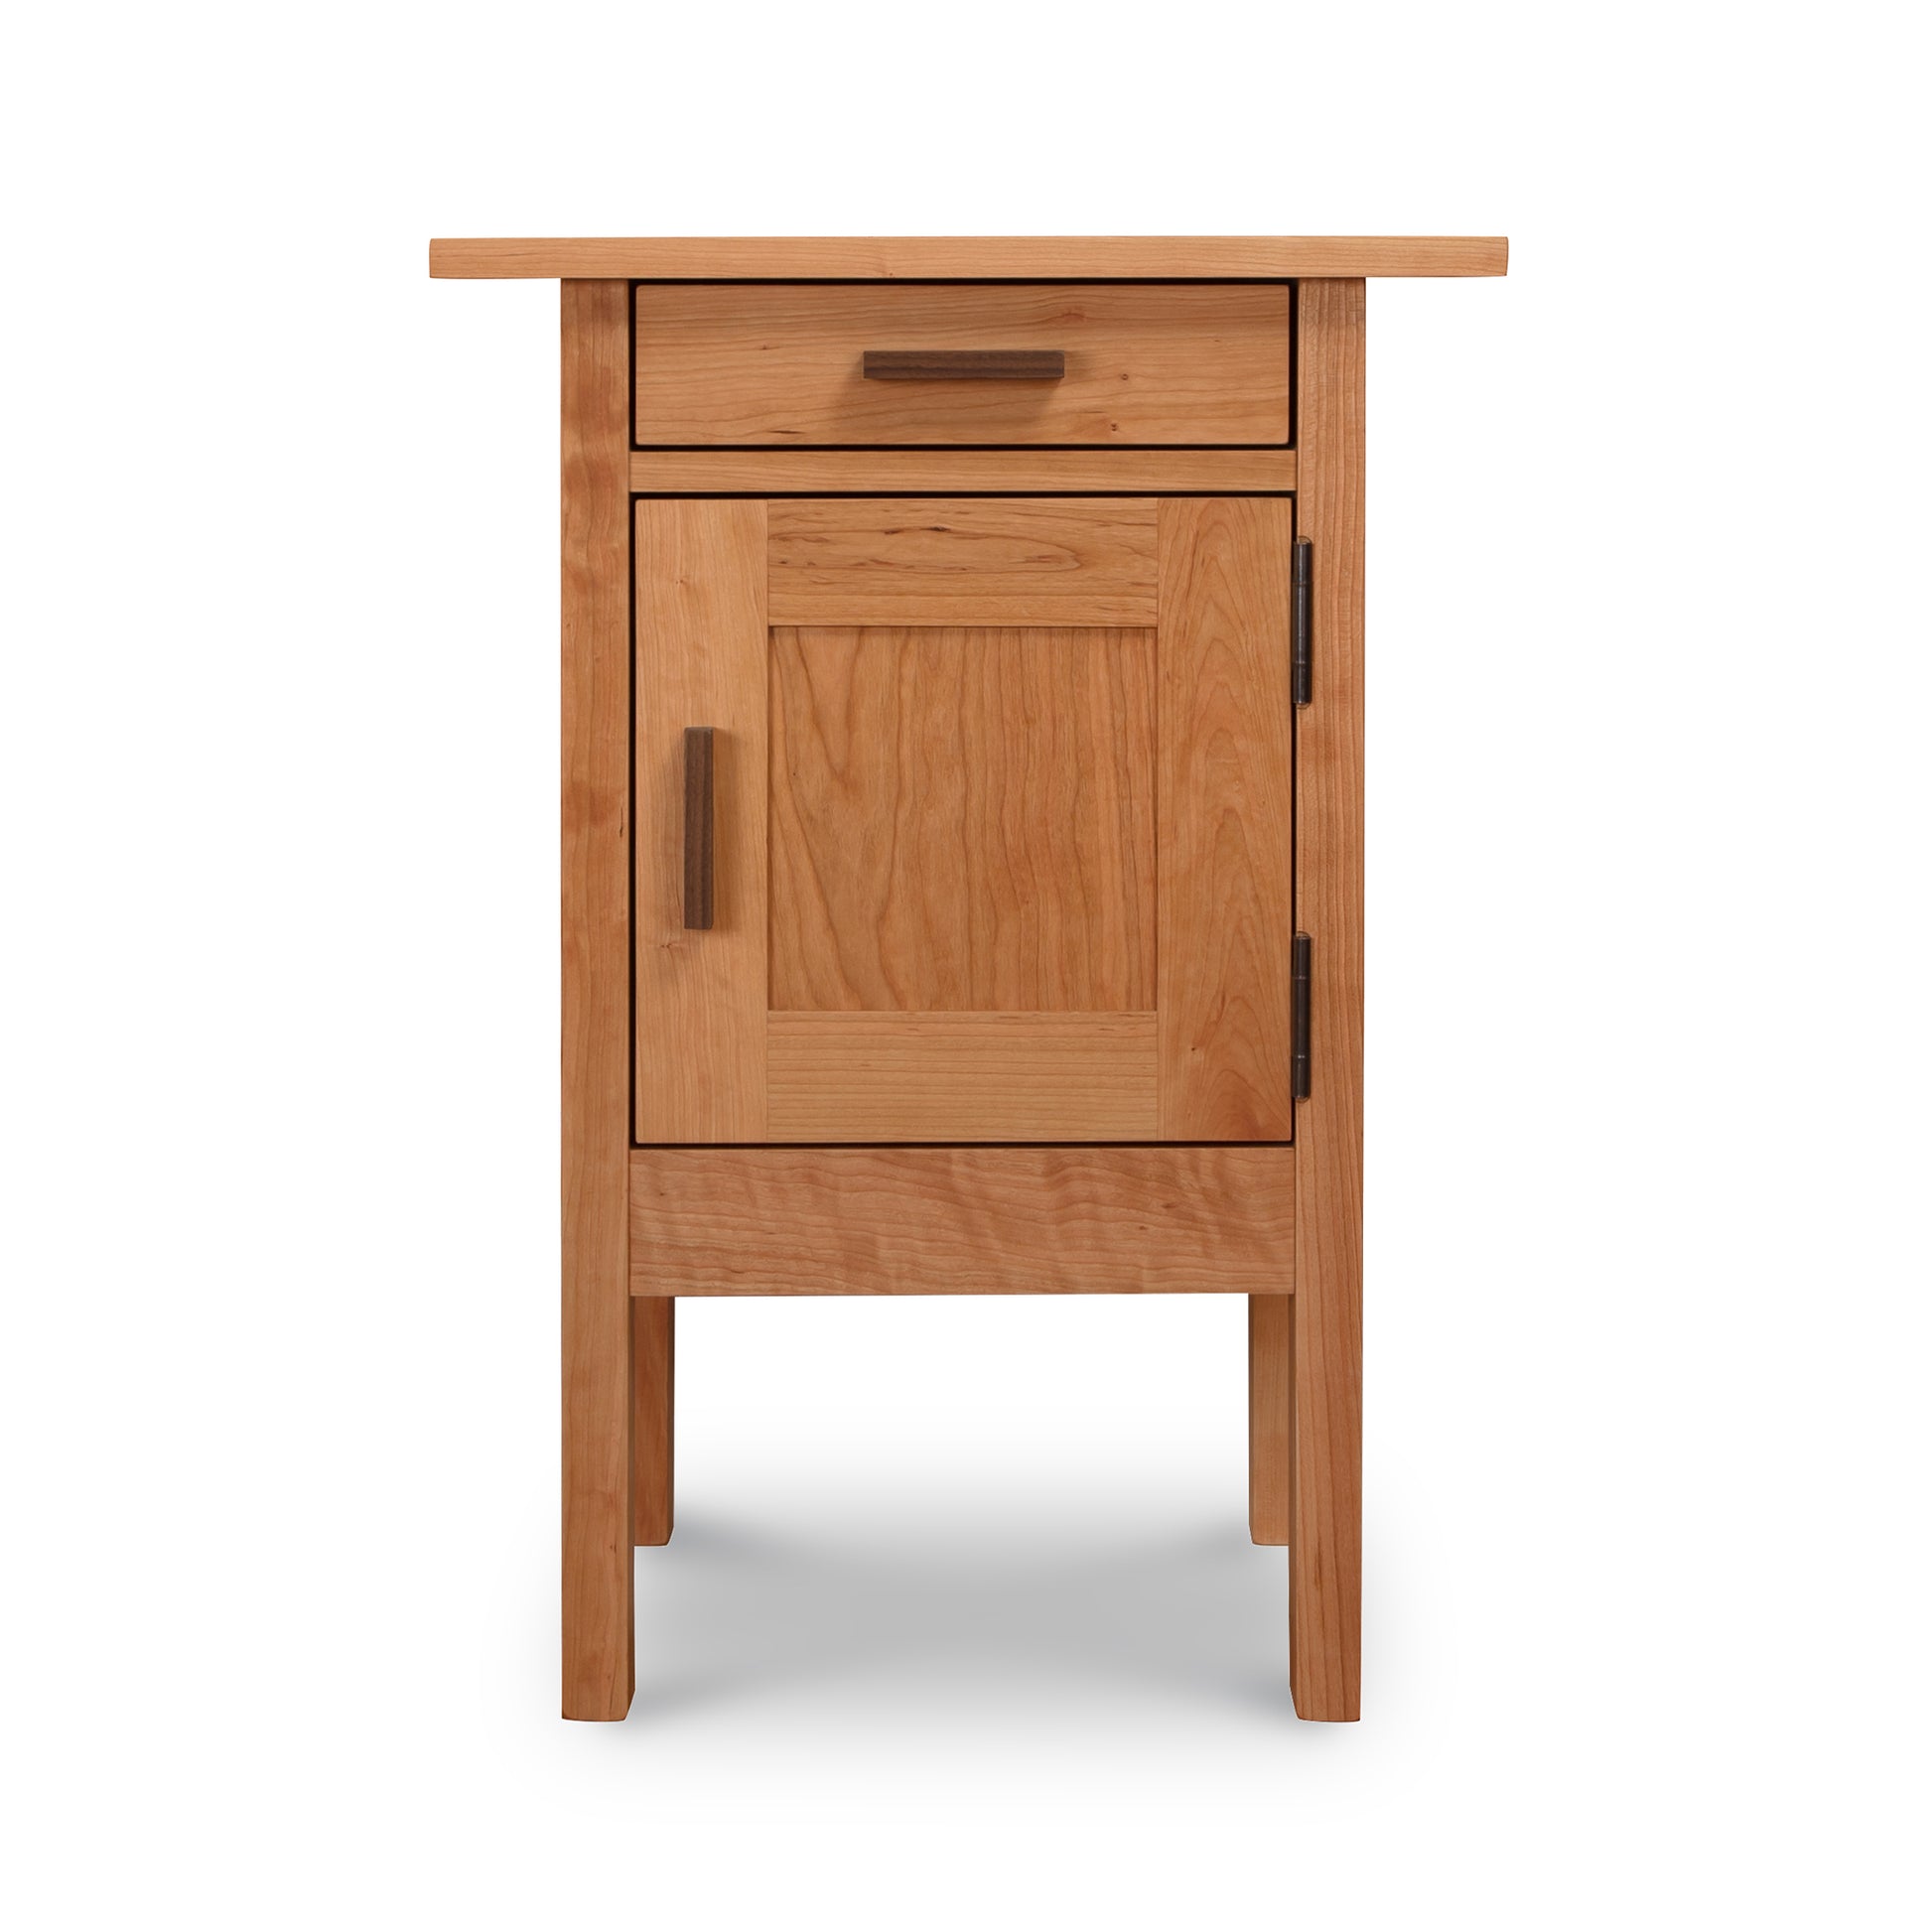 A Vermont Furniture Designs Modern Craftsman 1-Drawer Nightstand with Door featuring a single drawer and a cabinet door, constructed from solid hardwood with a natural cherry finish, isolated against a white background.